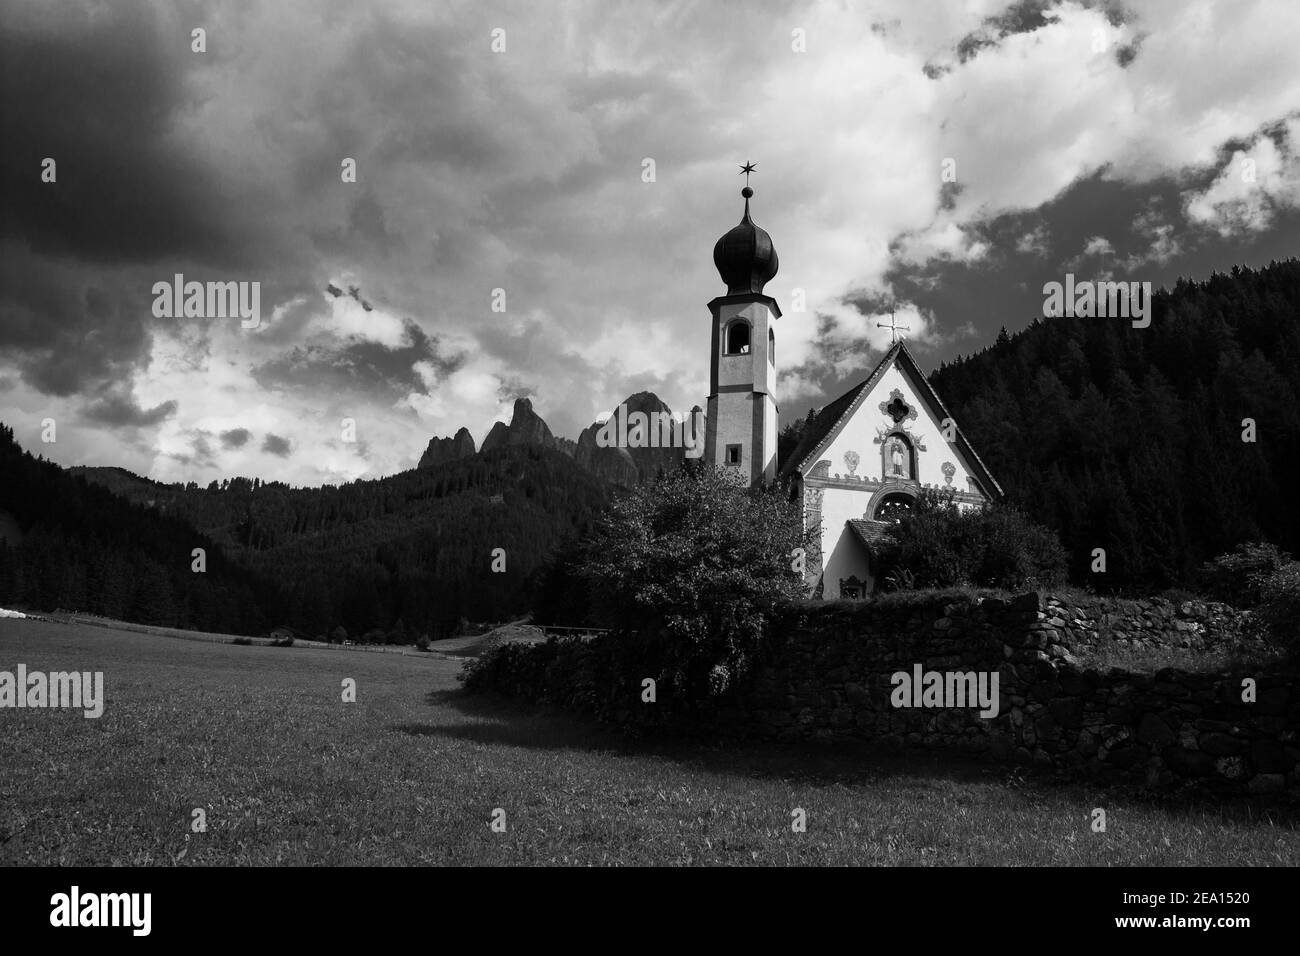 Chapel of st magdalena Black and White Stock Photos & Images - Alamy